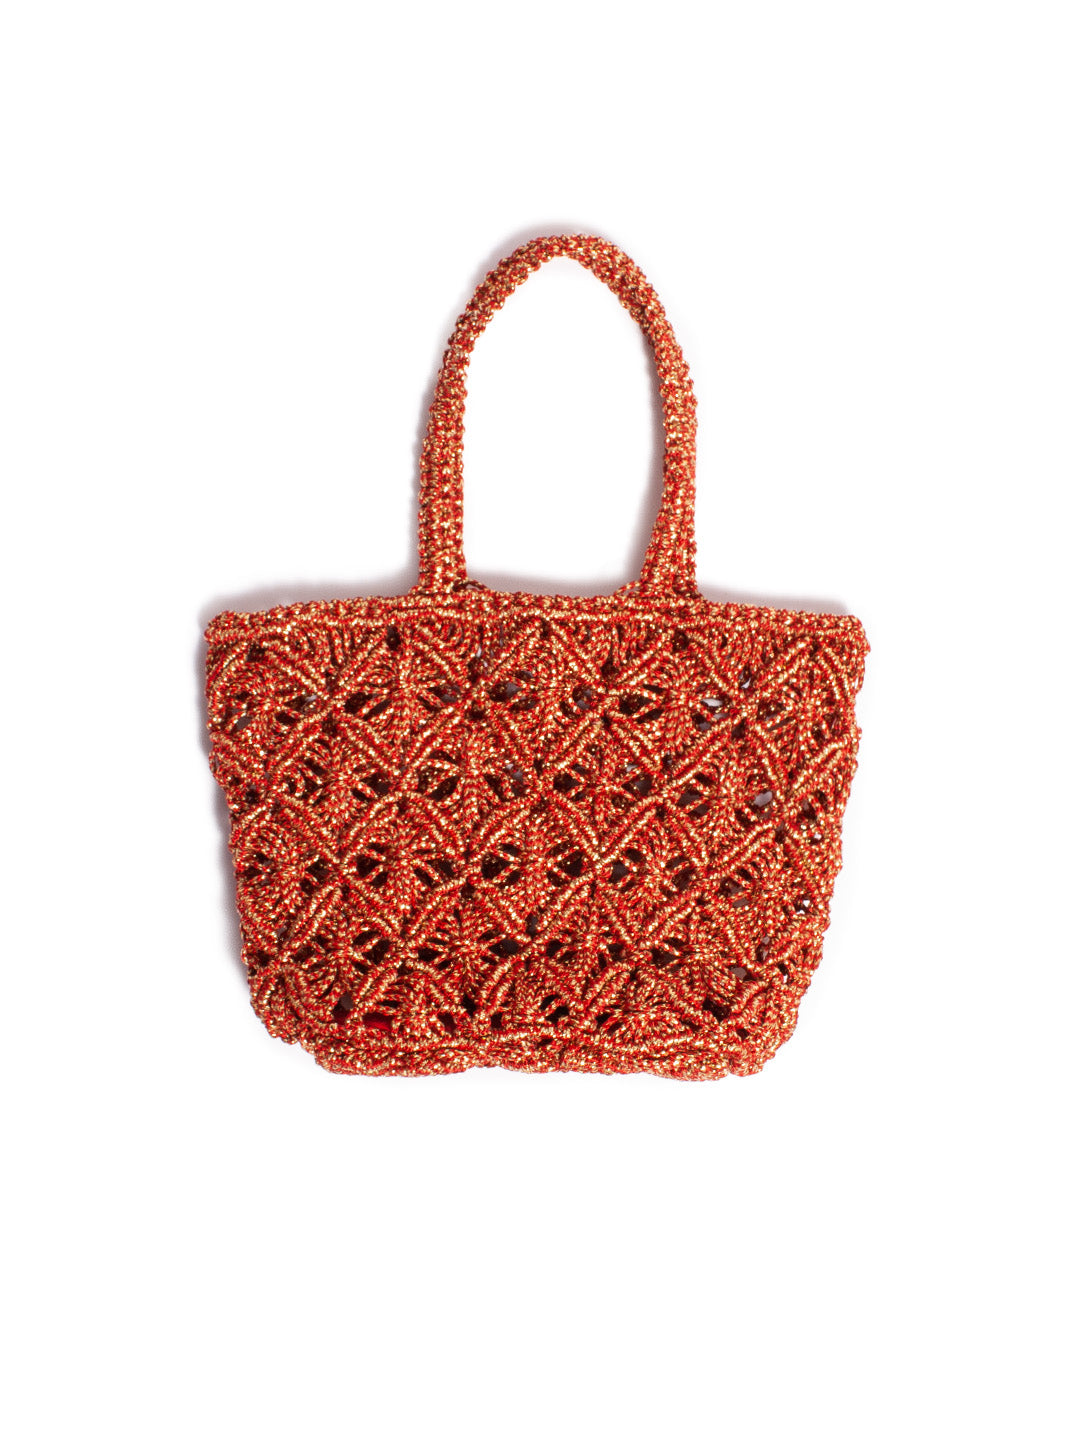 Bags, Handmade bags from local artisans